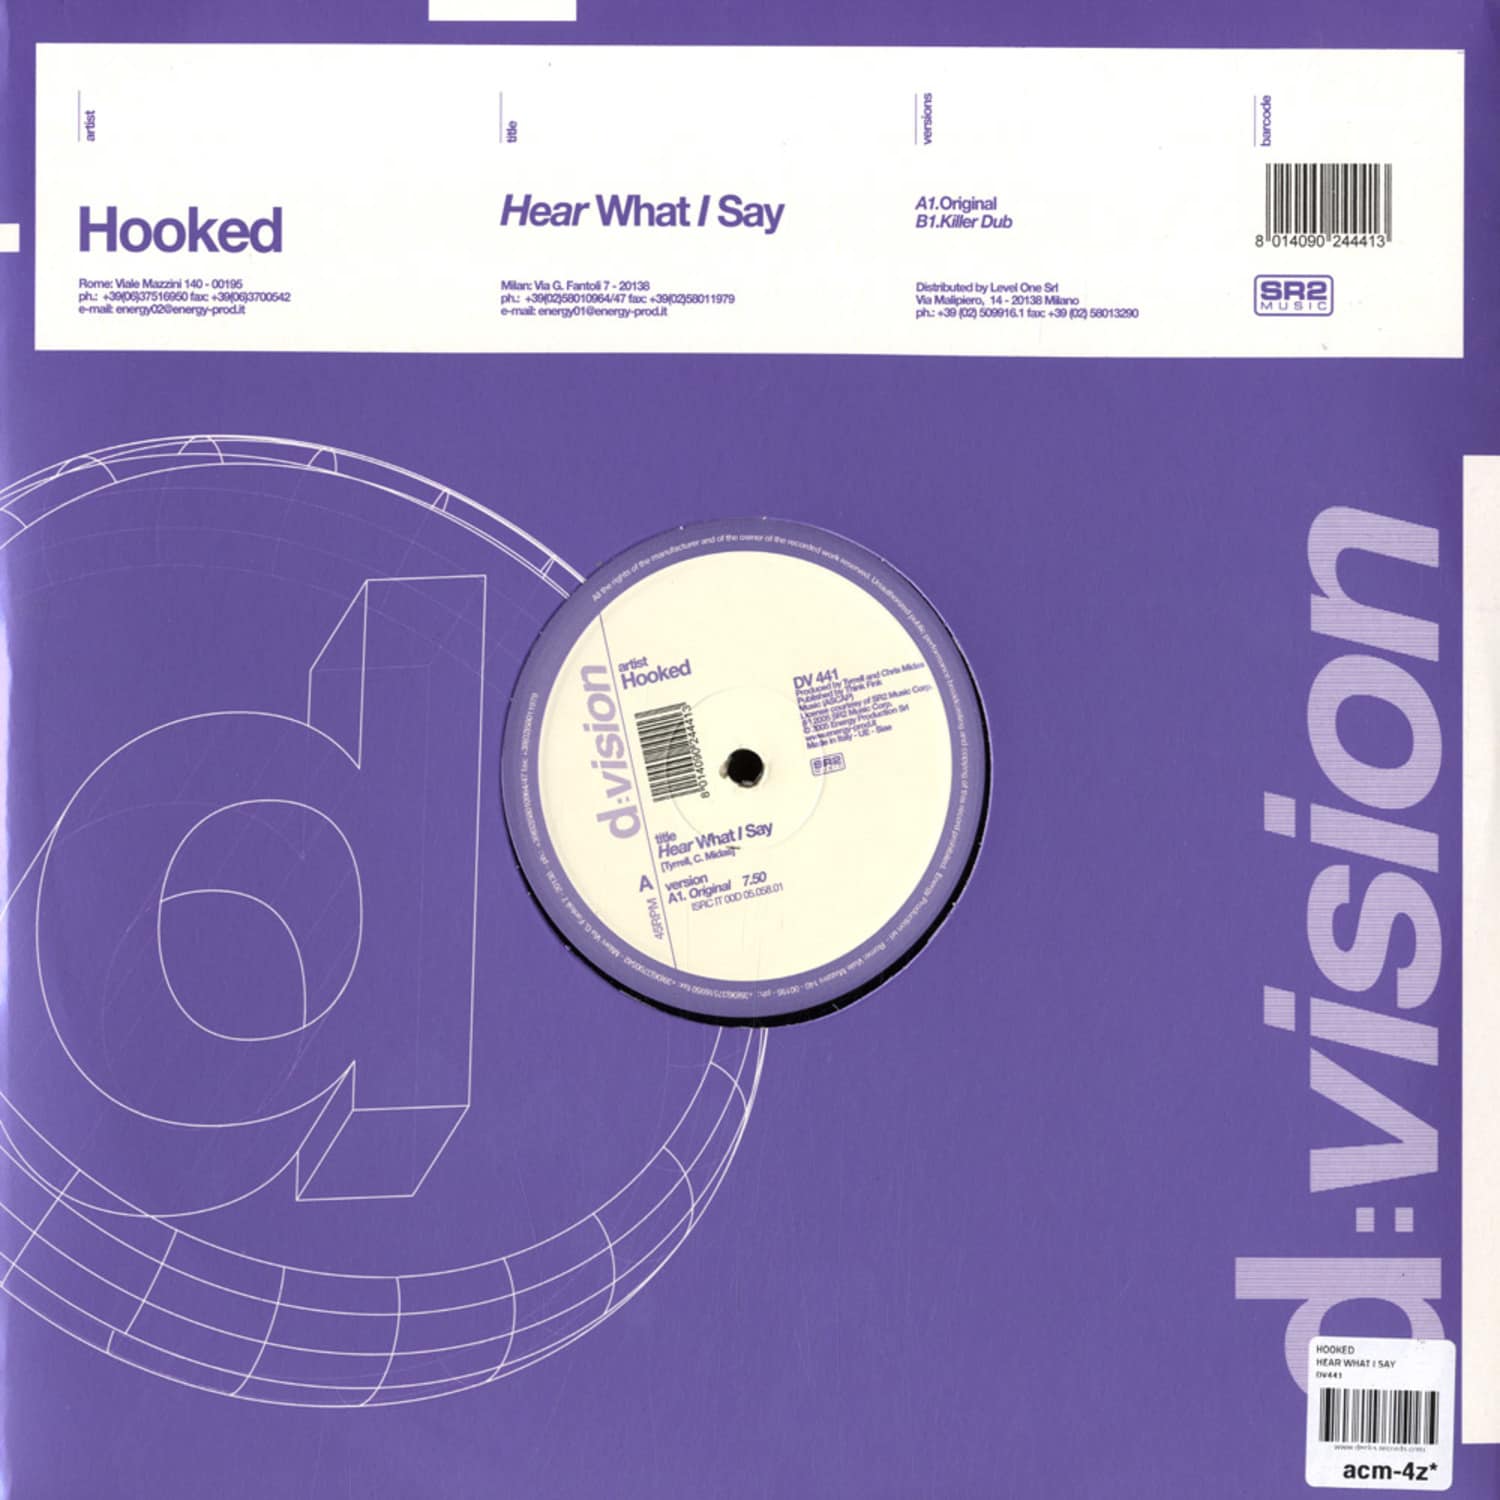 Hooked - HEAR WHAT I SAY